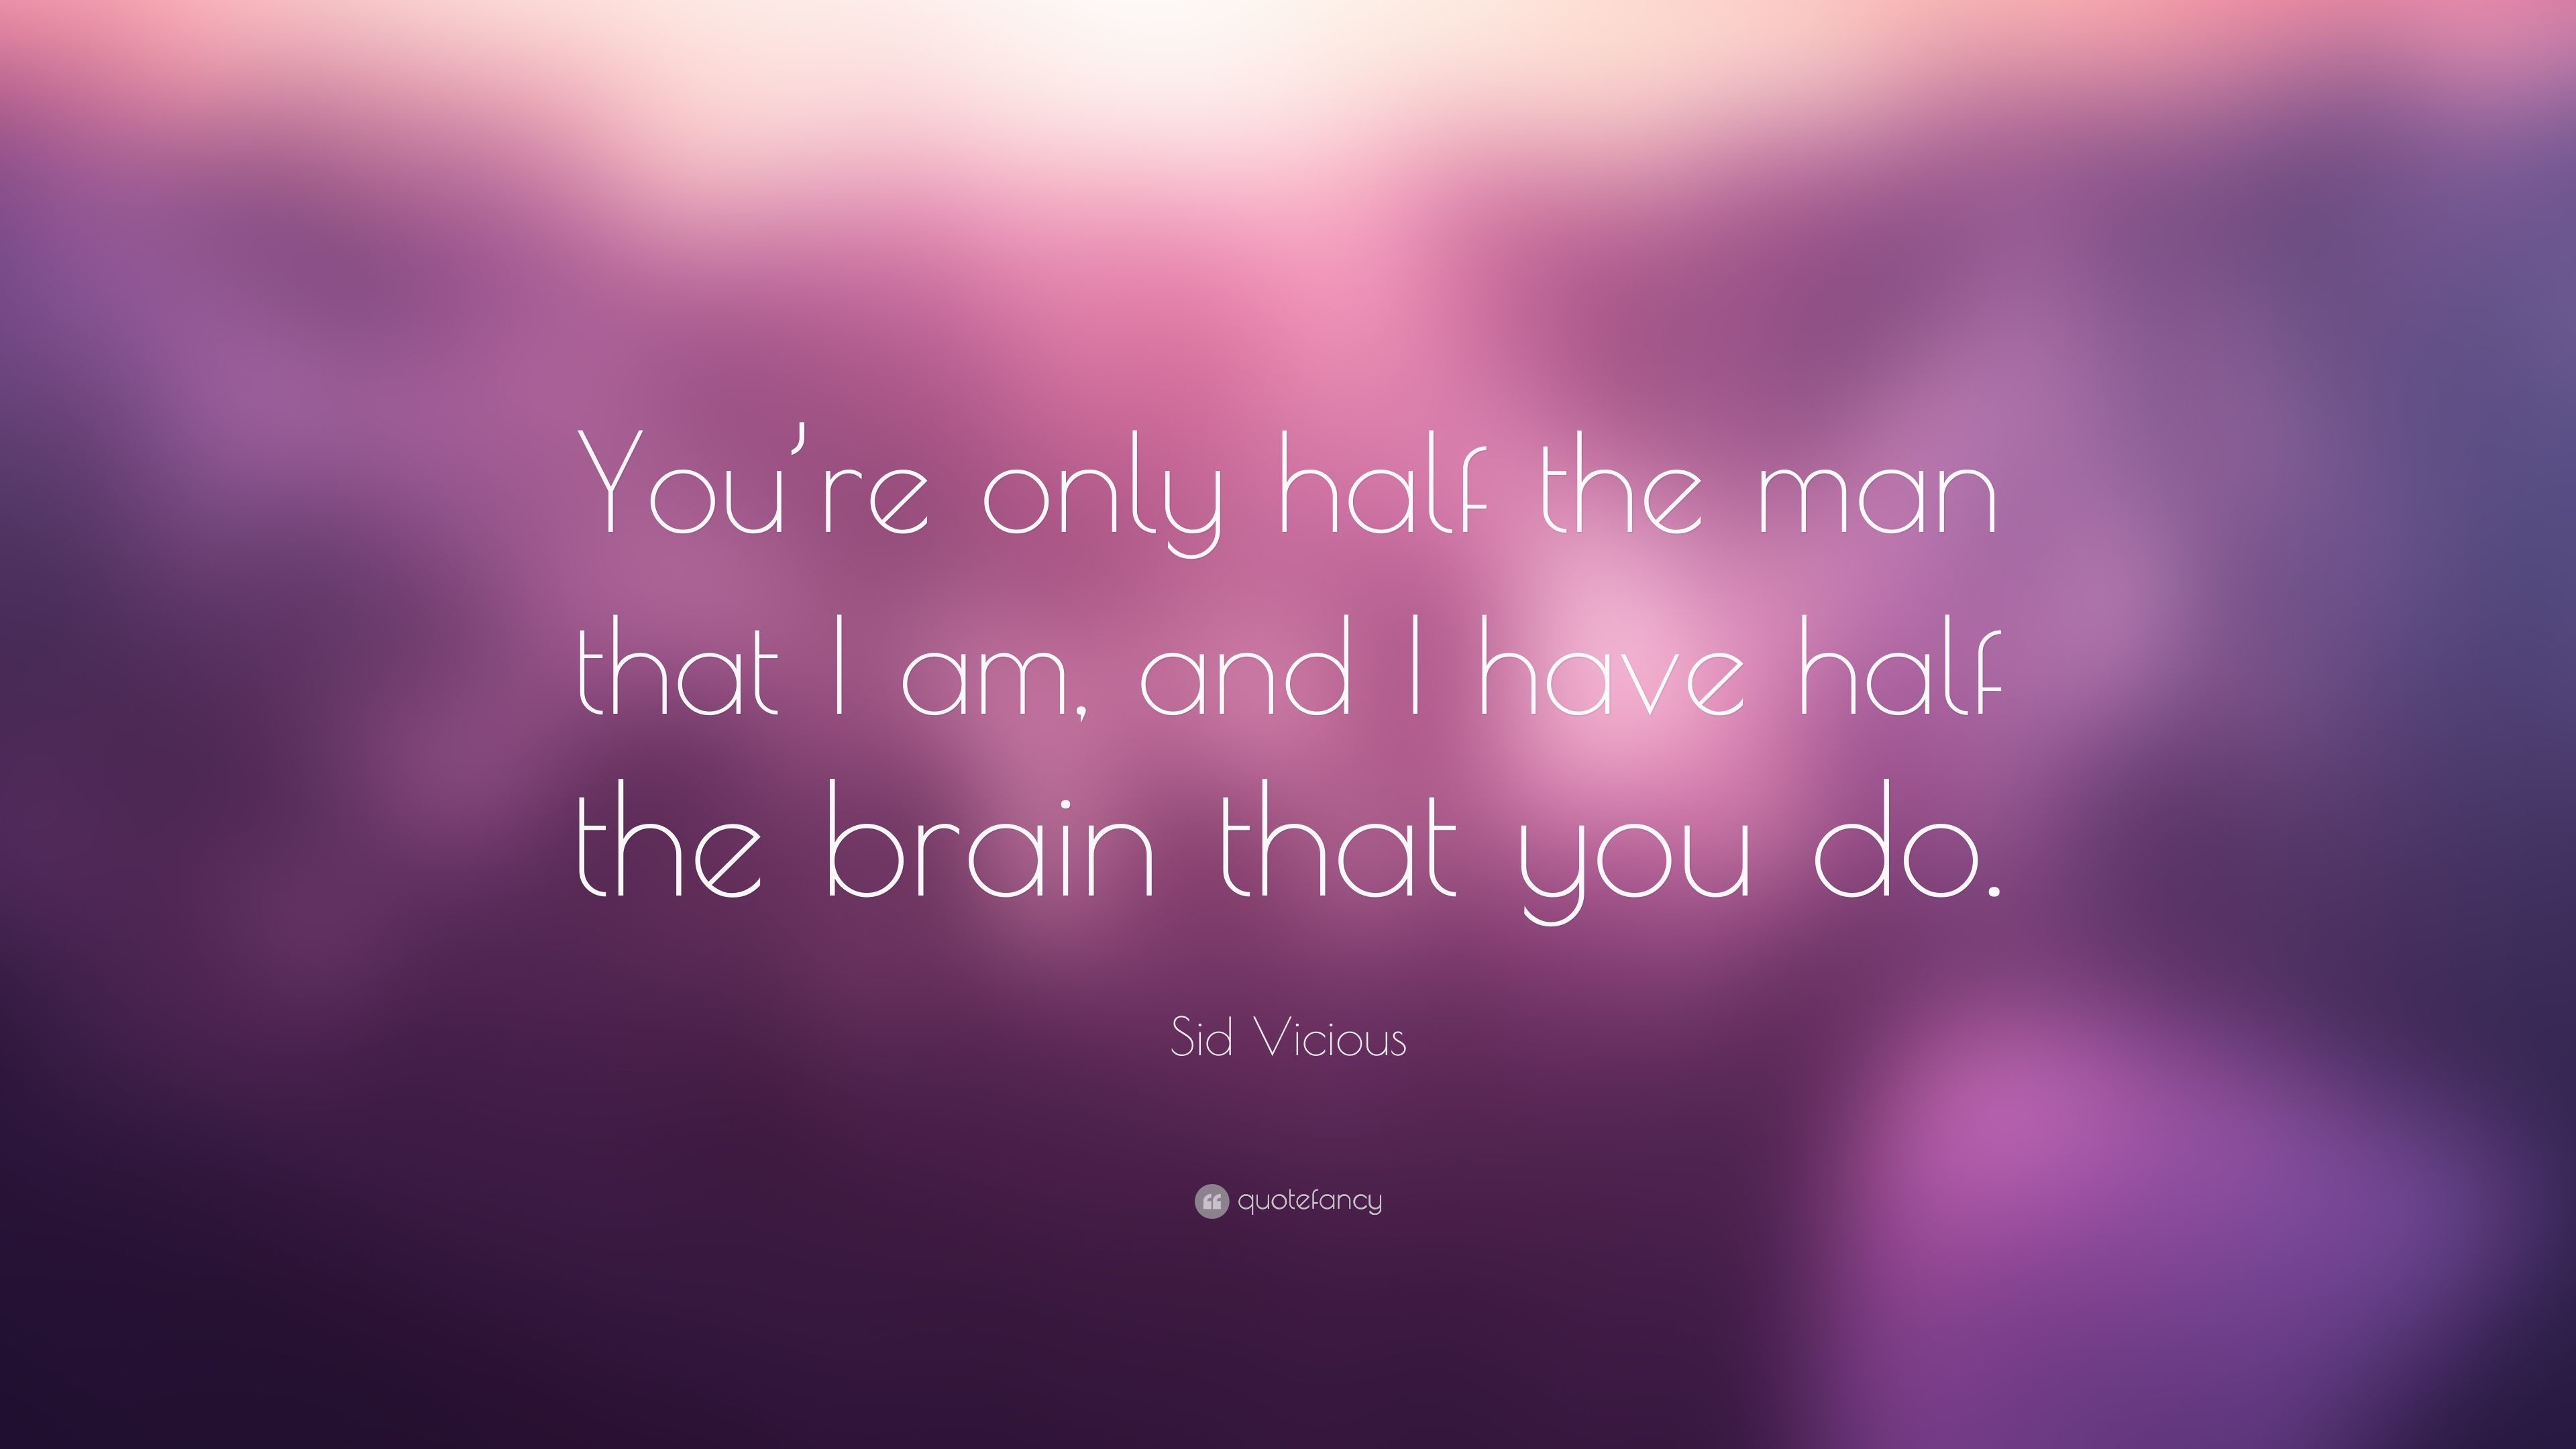 3840x2160 Sid Vicious Quote: “You're only half the man that I am,